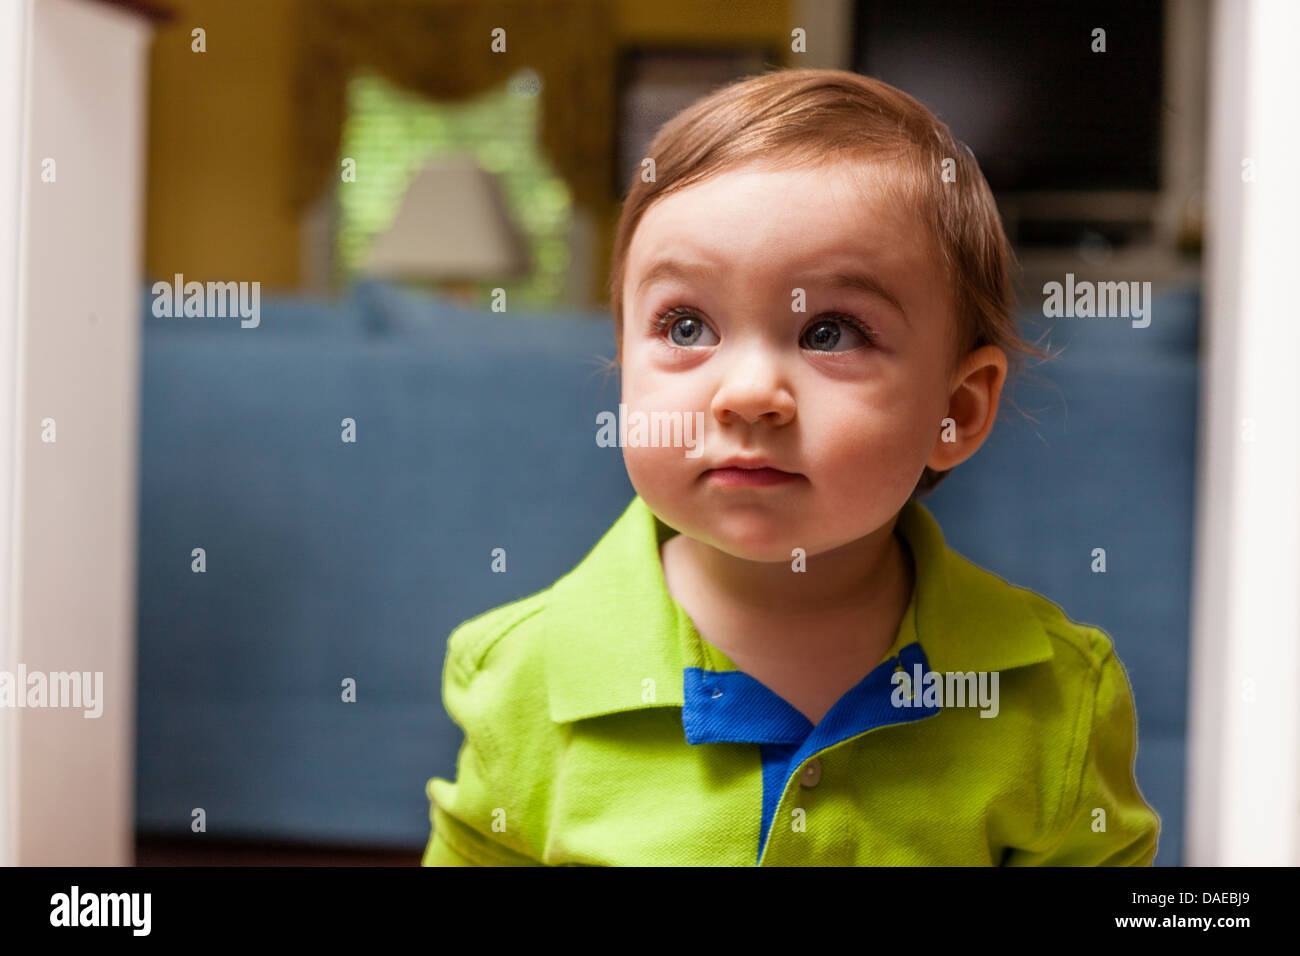 Close up portrait of young male toddler Banque D'Images